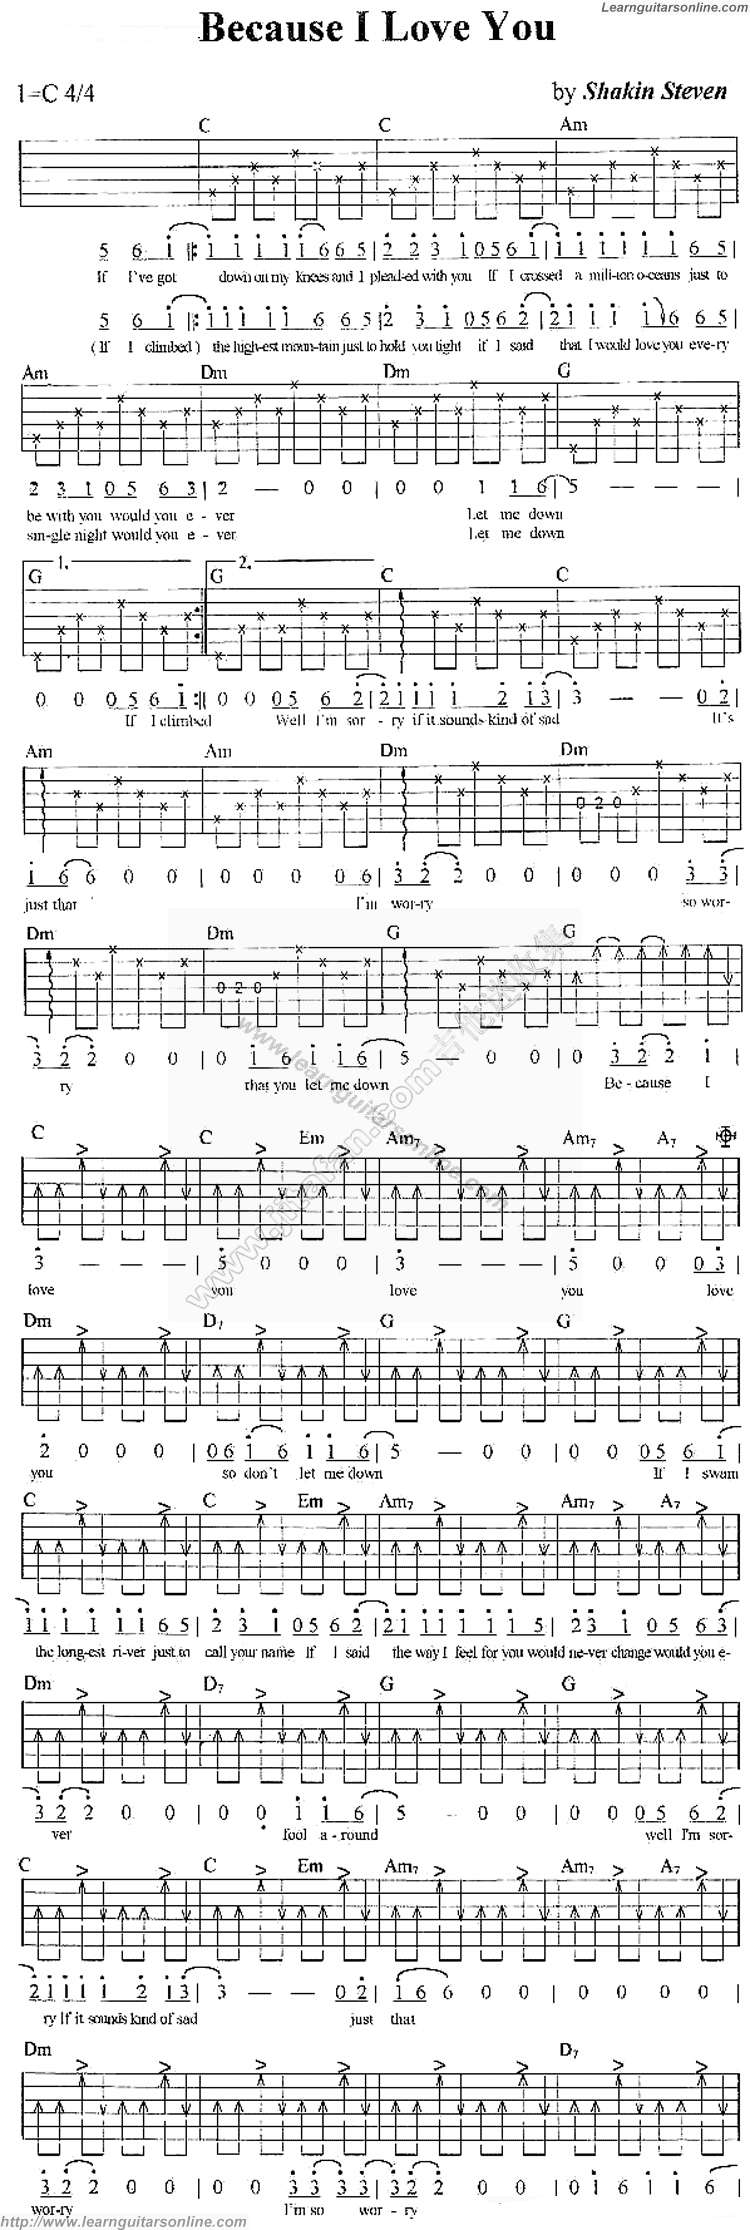 Because I Love You Chords by Shakin Stevens Guitar Tabs Chords Solo Notes Sheet Music Free